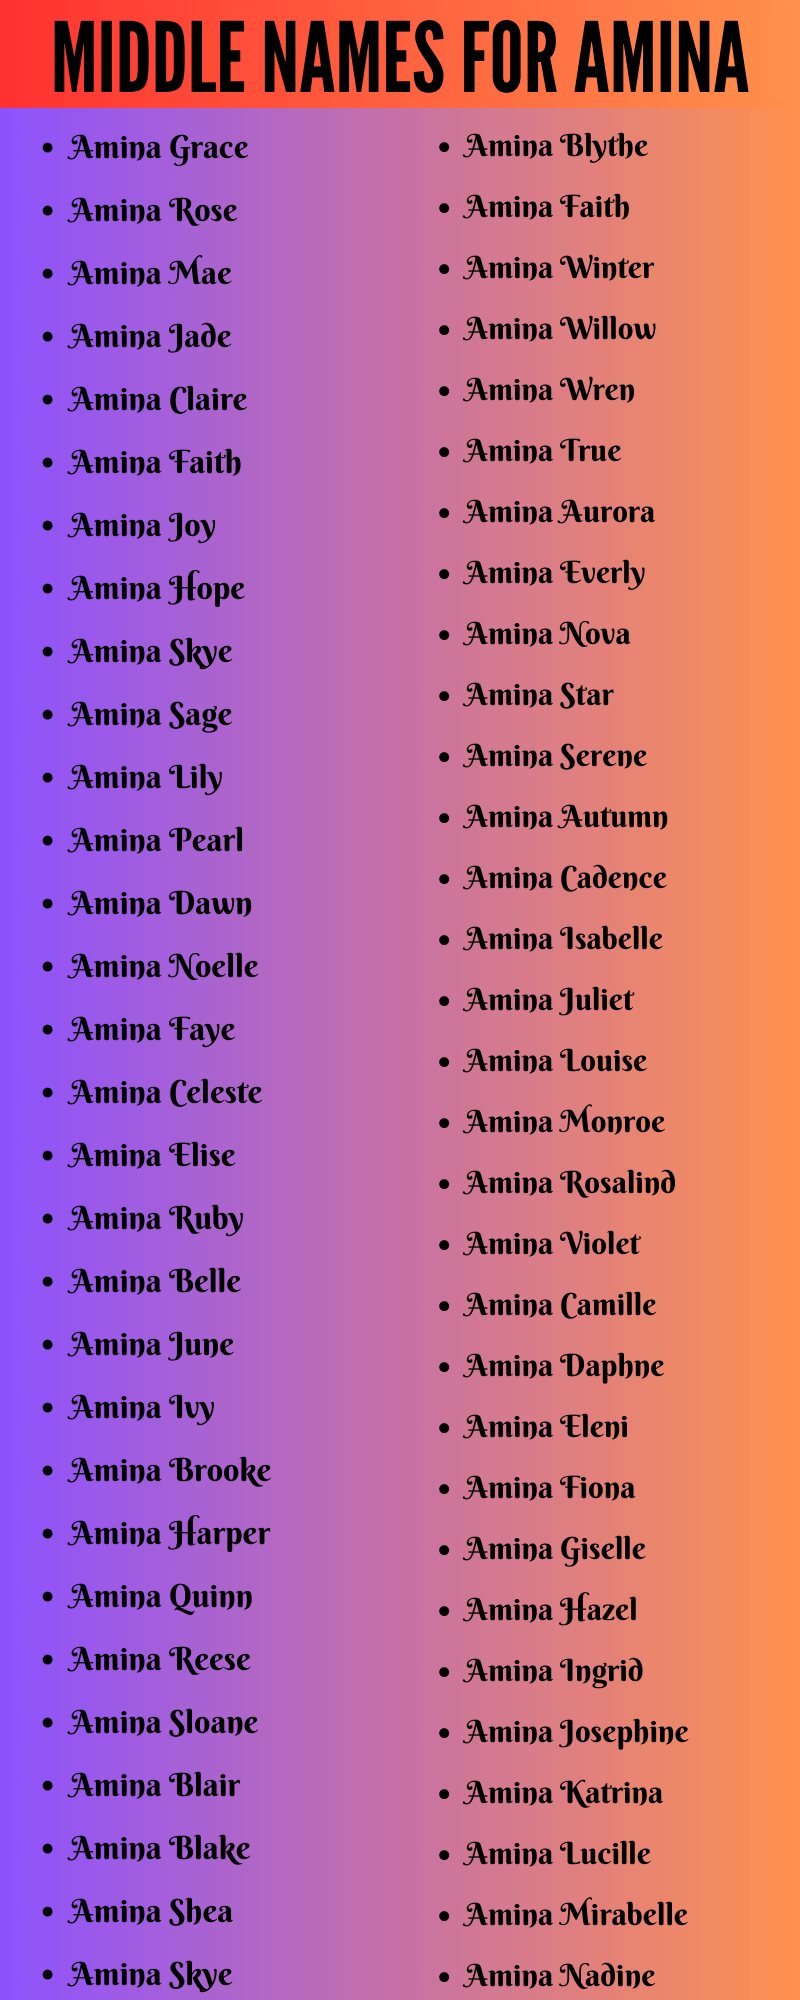 400 Classy Middle Names For Amina